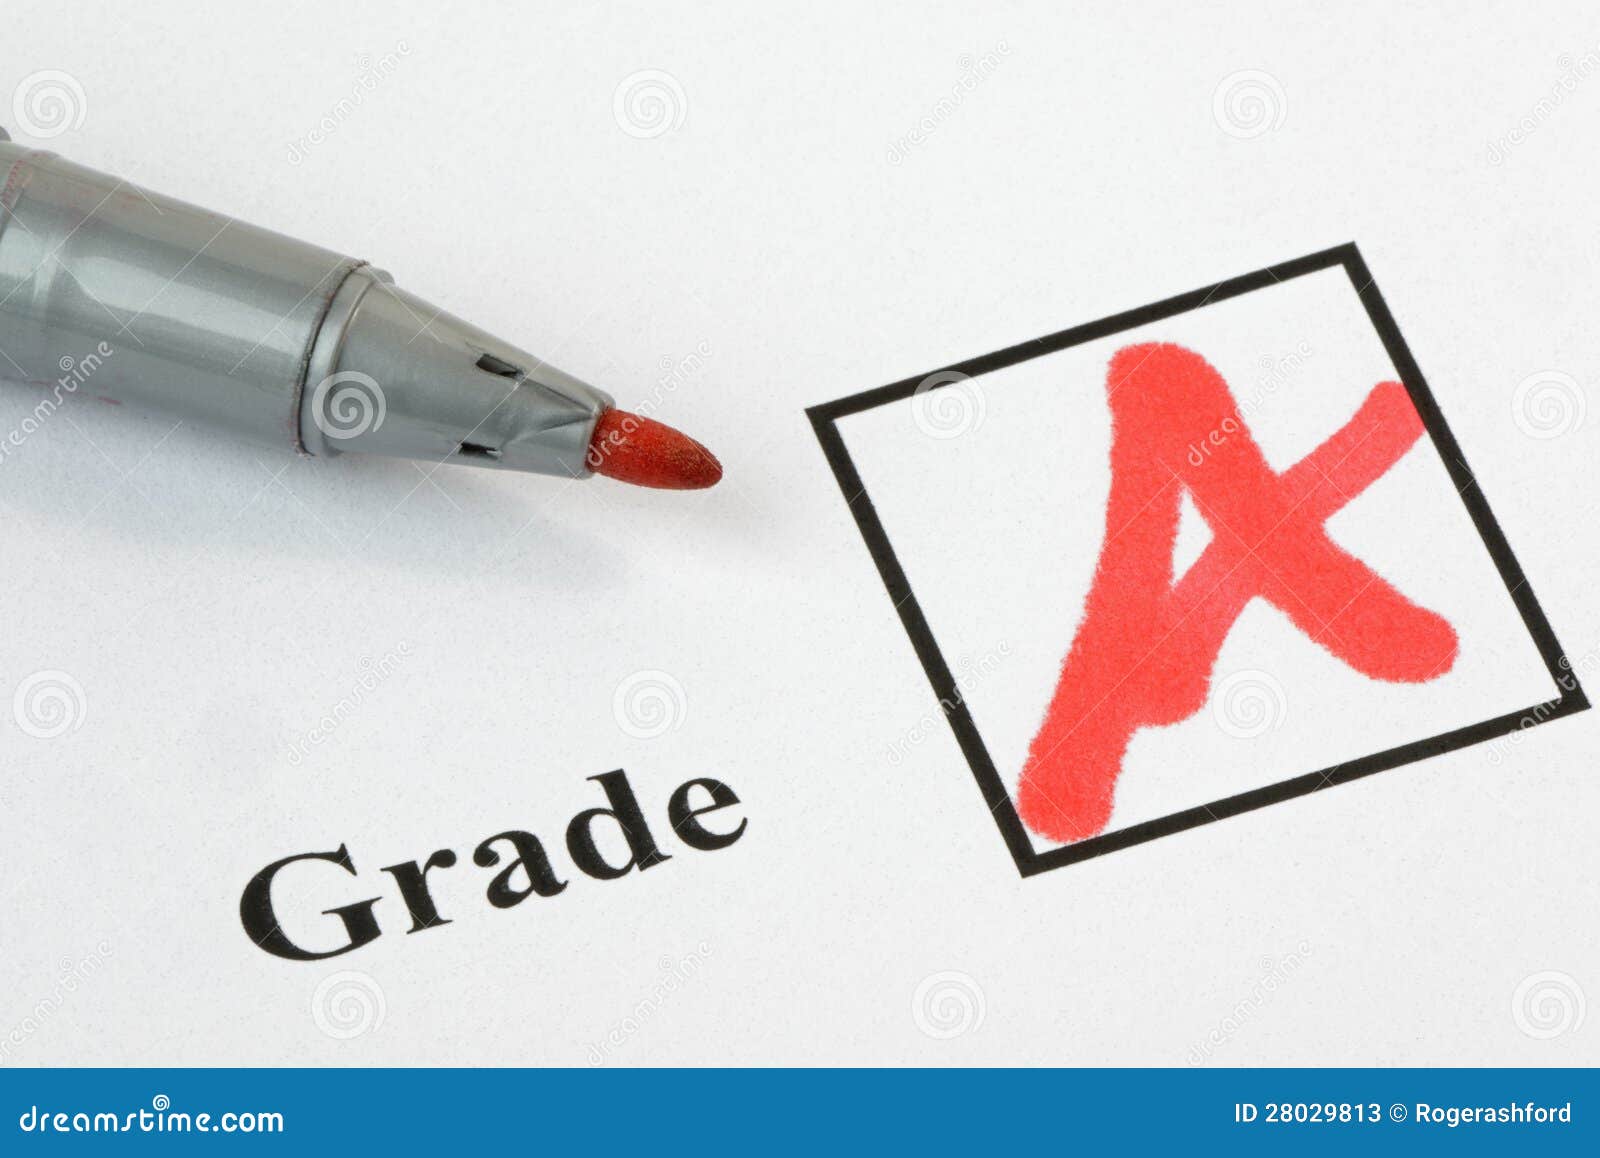 Grade A written on an exam paper, with pen. 36 mp image